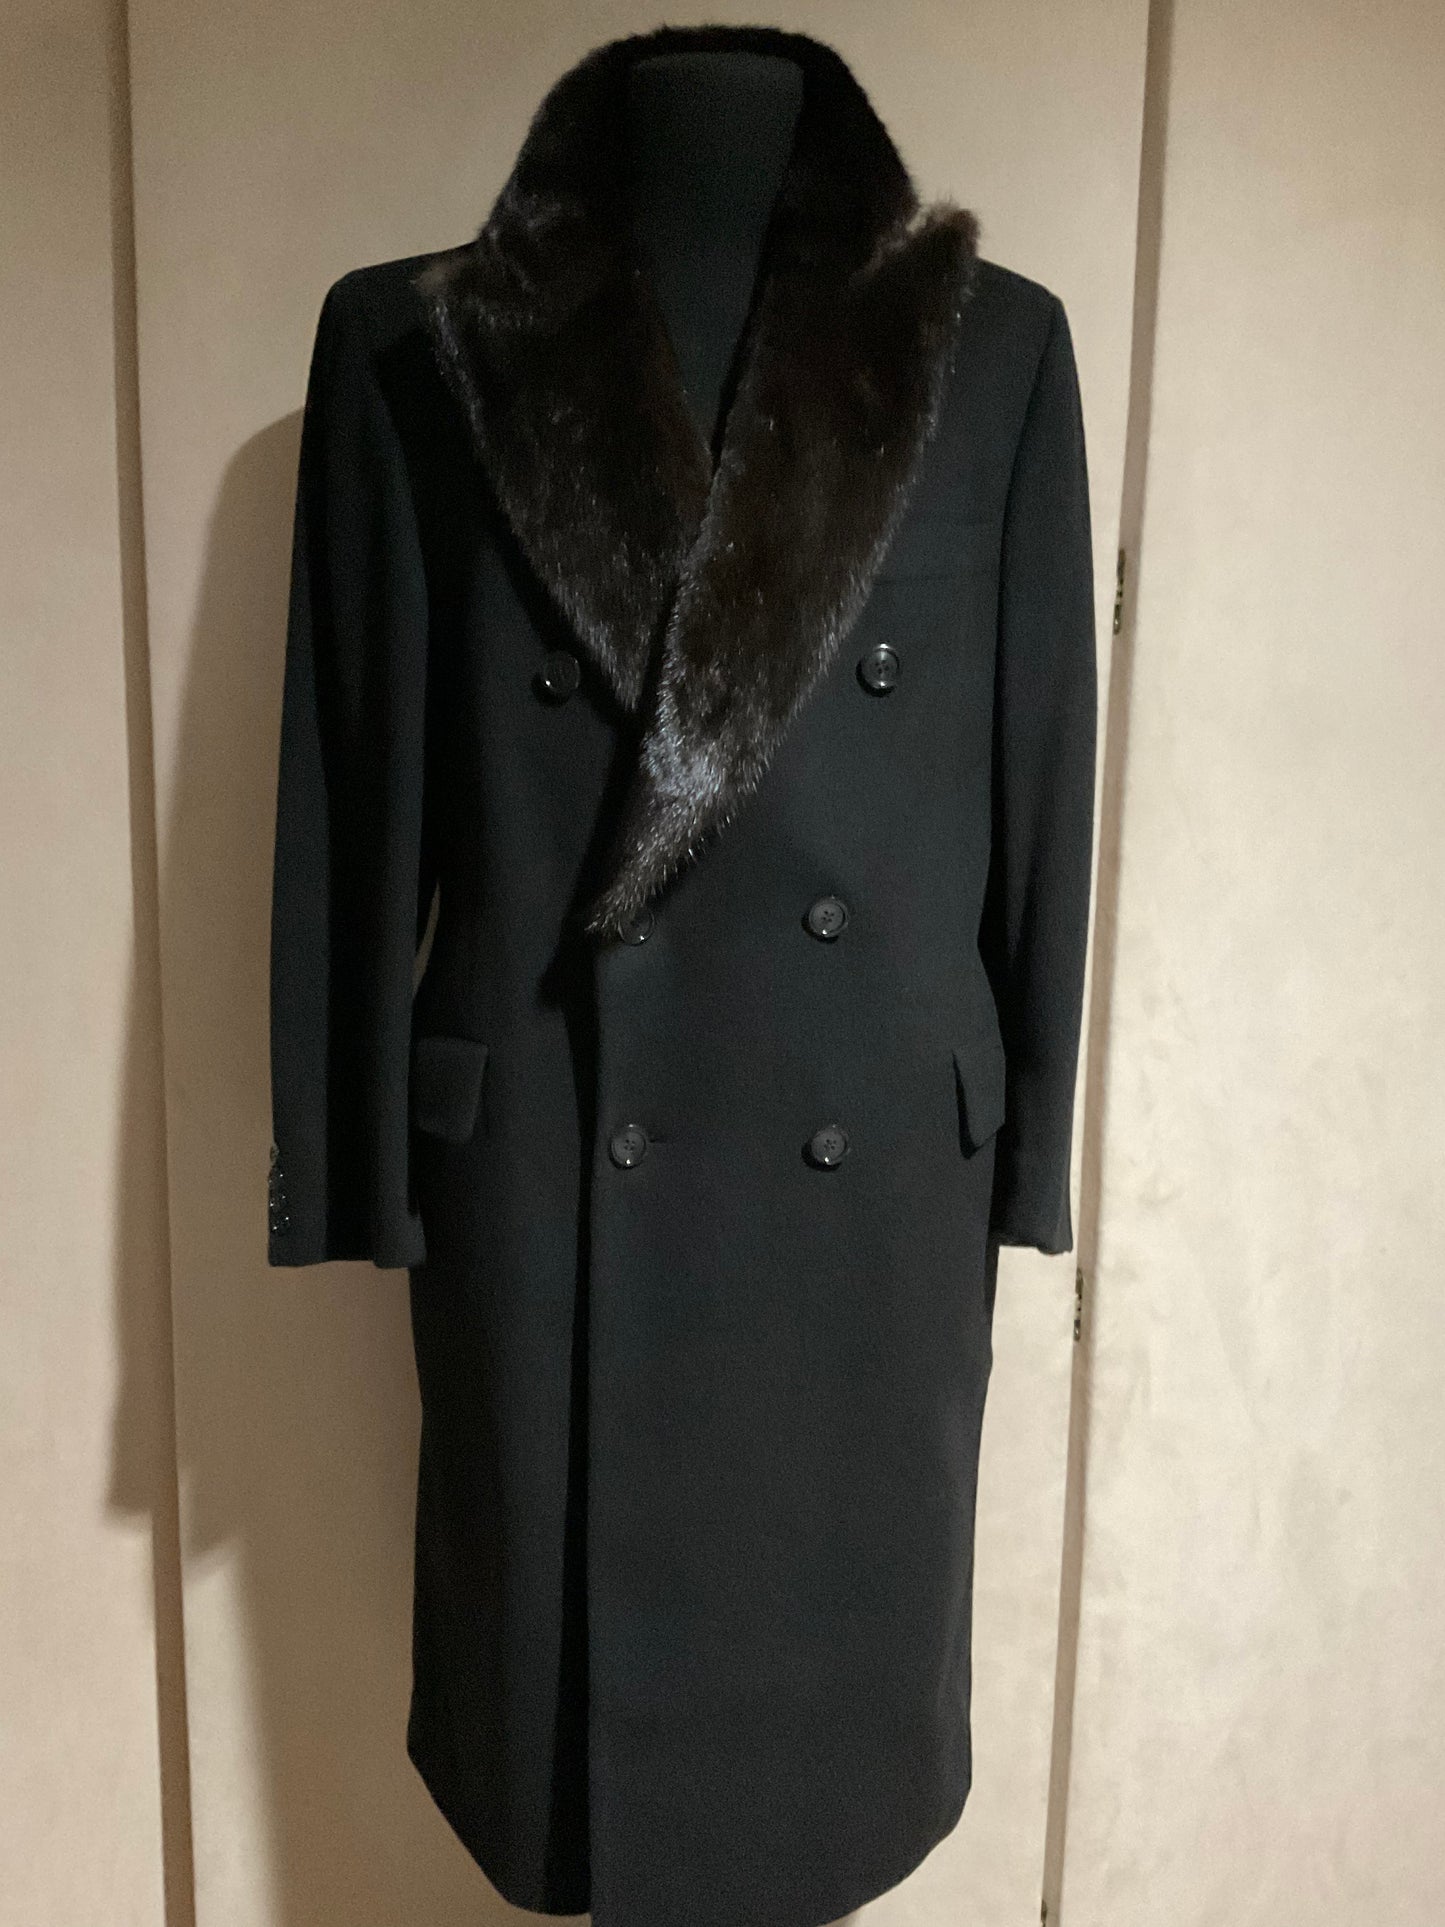 R P OVERCOAT / BLACK / PURE CASHMERE & MINK / NEW / 40 - 42 / MADE IN CANADA